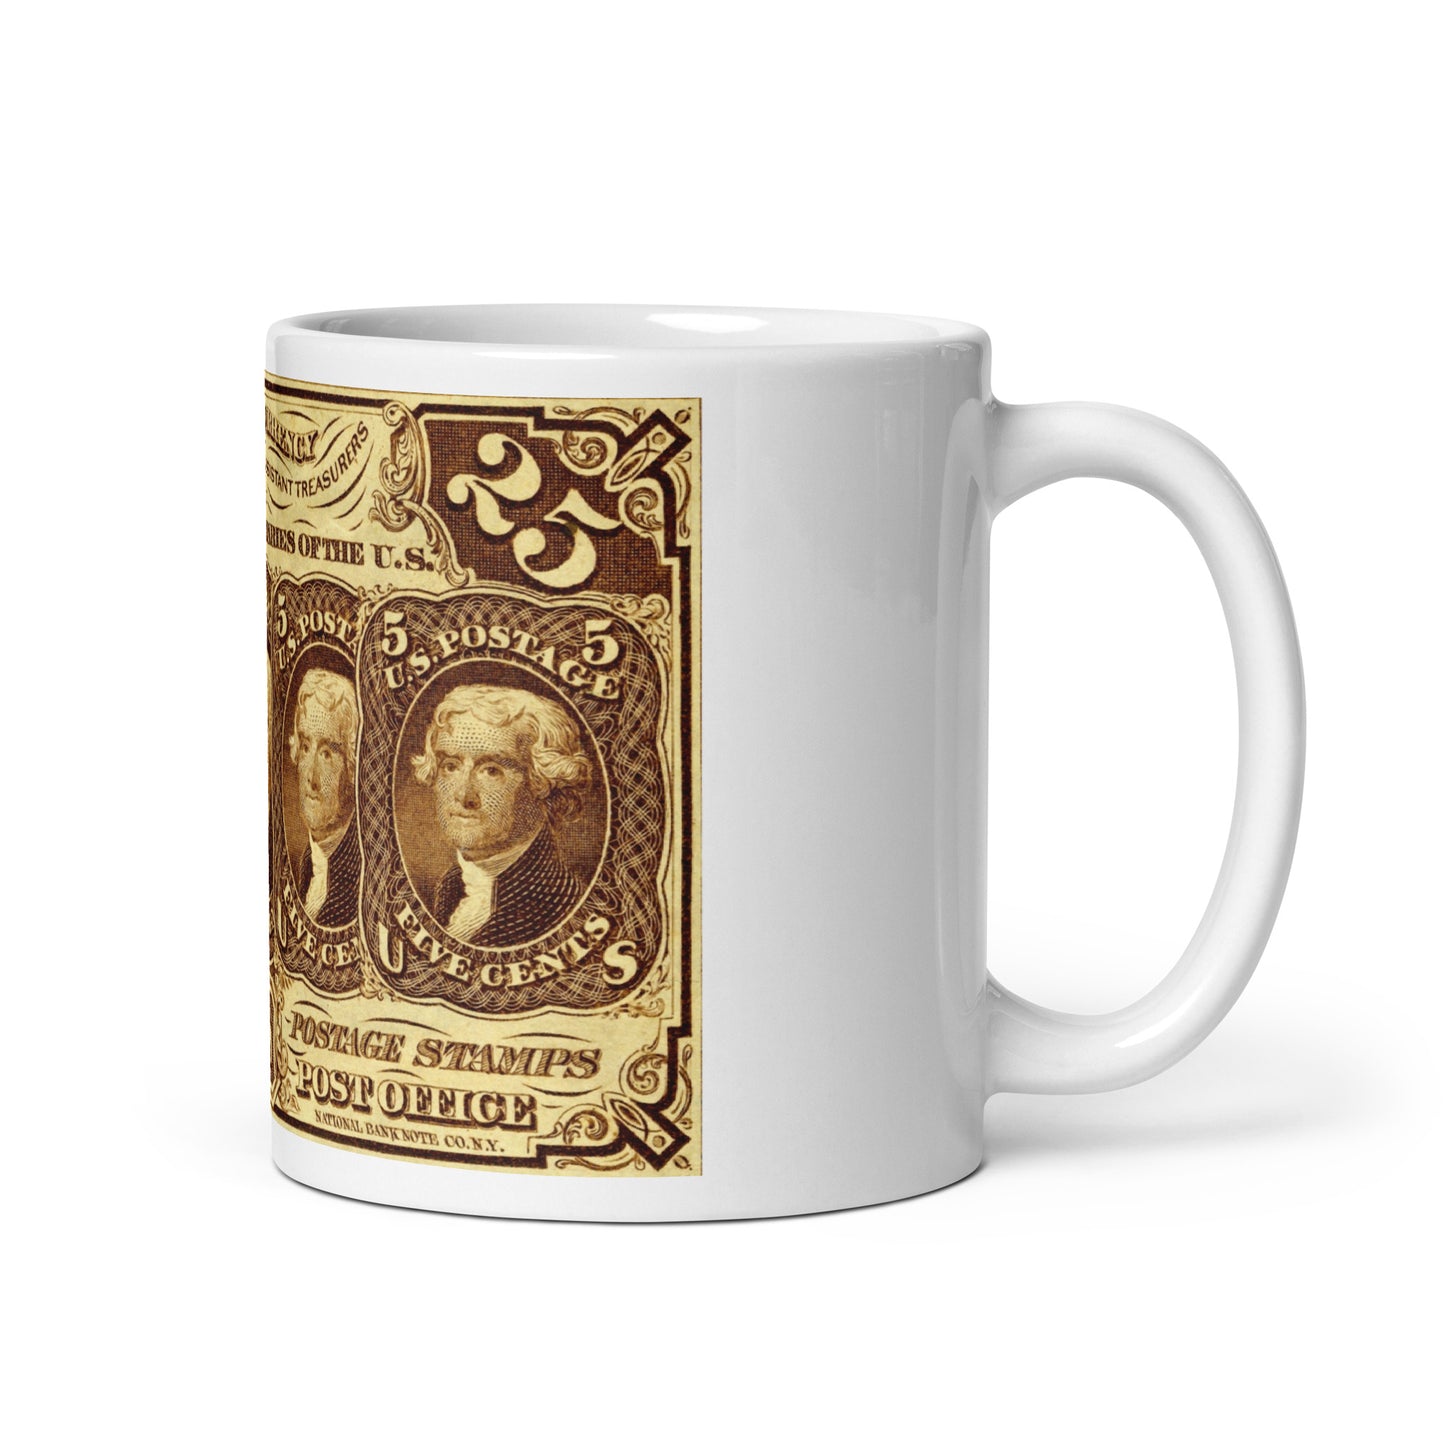 25 Cents 1ST Issue Fractional Currency Edition - Classic Currency Collector's Mug